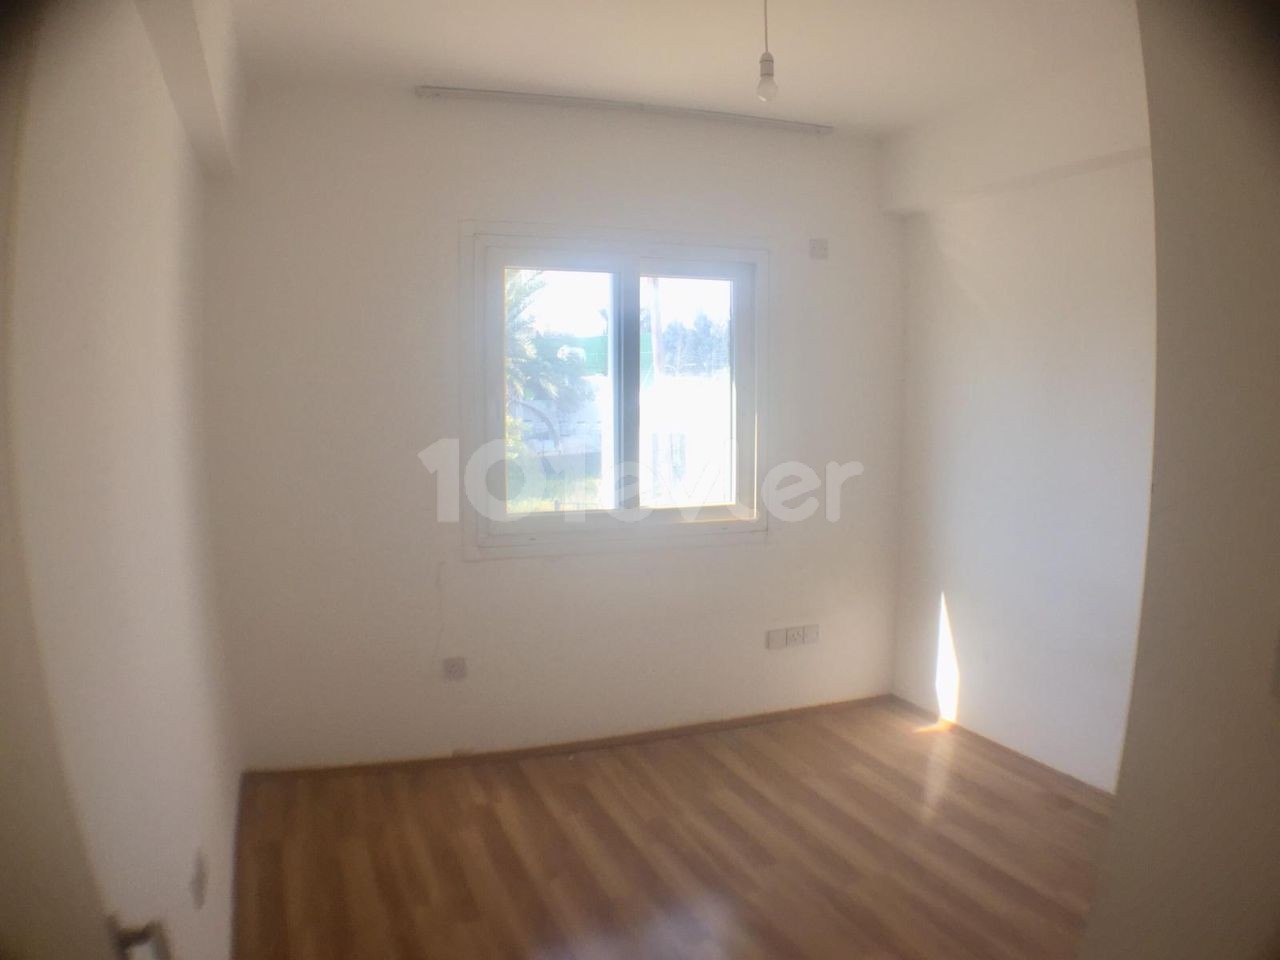 Nicosia /Kızılbaş Unfurnished Flat for Rent Annually in Advance ** 